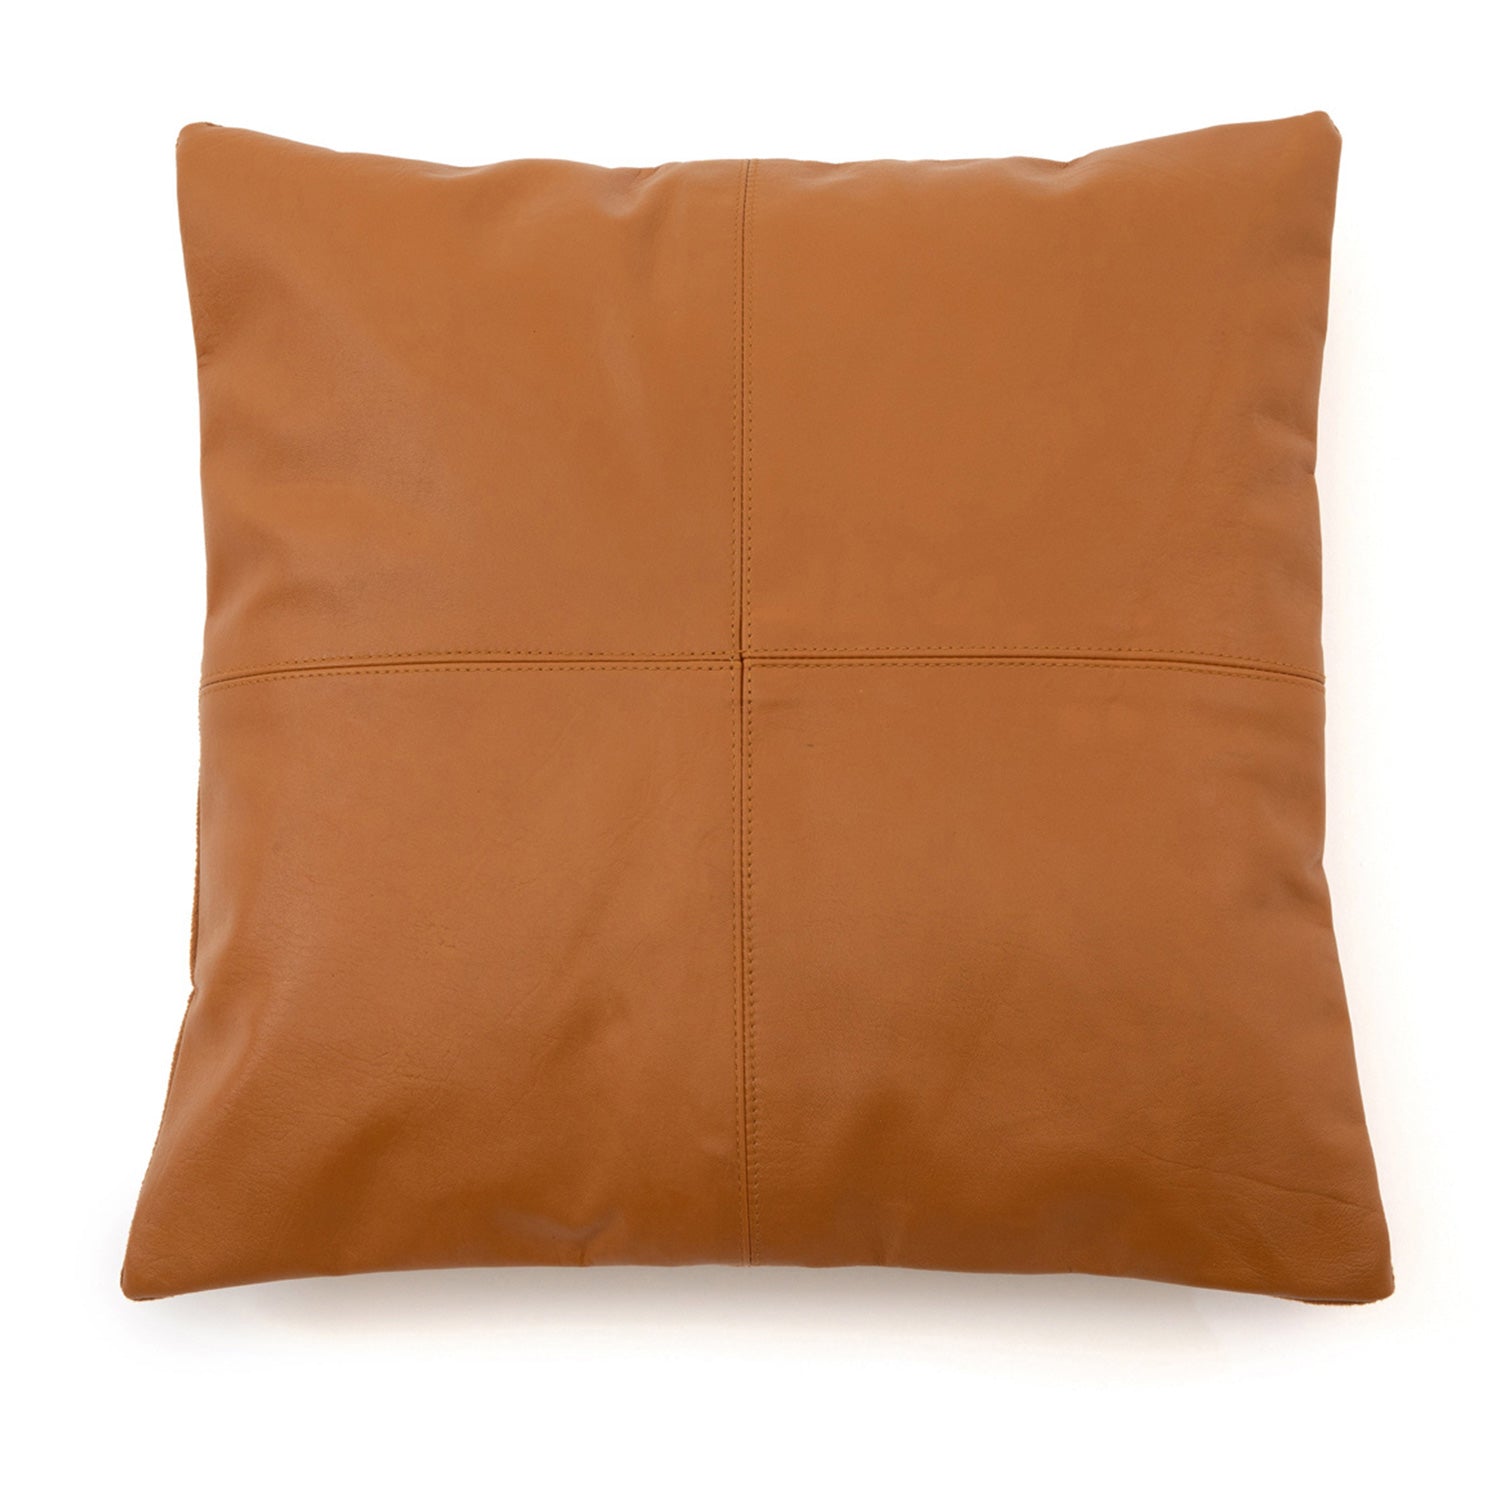 Four Panel Leather Kussenhoes Camel 40x40